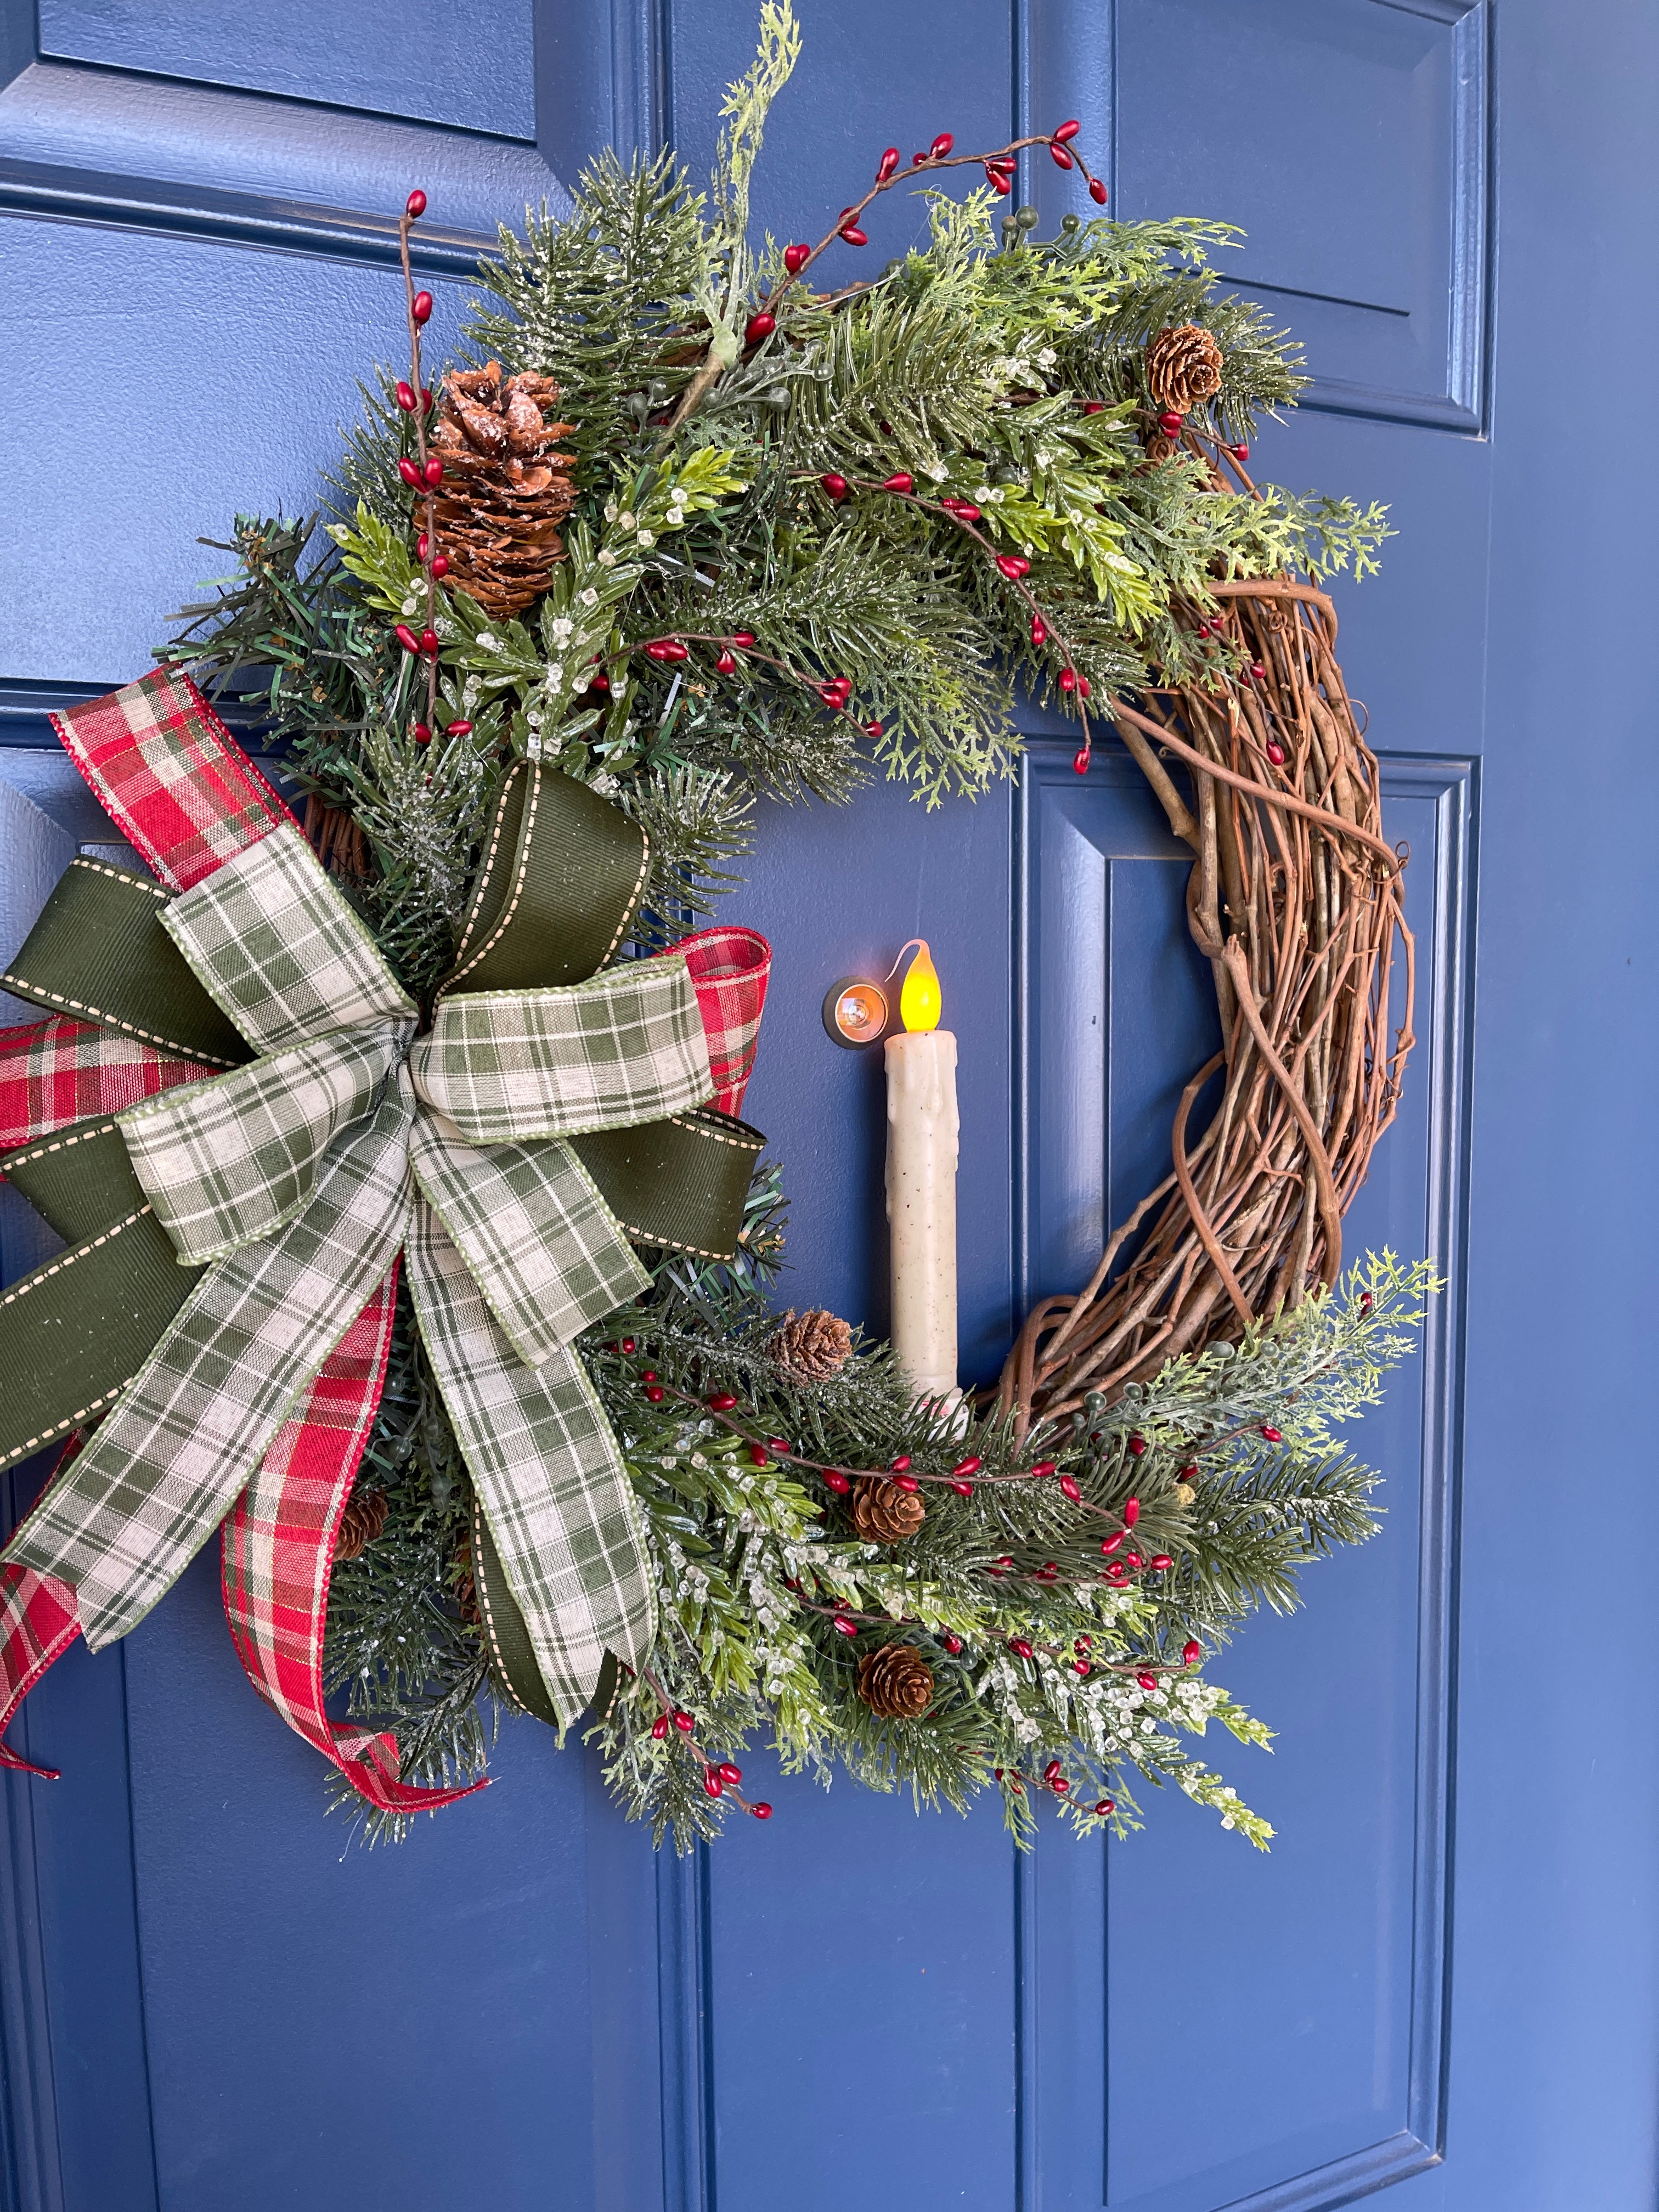 Left Side View of Christmas Grapevine Wreath with Artificial Pine Branches, Red Berries, Pinecones, with a Red, White and Green Bow and an Artificial Battery Operated Candle in the Center on a Blue Door